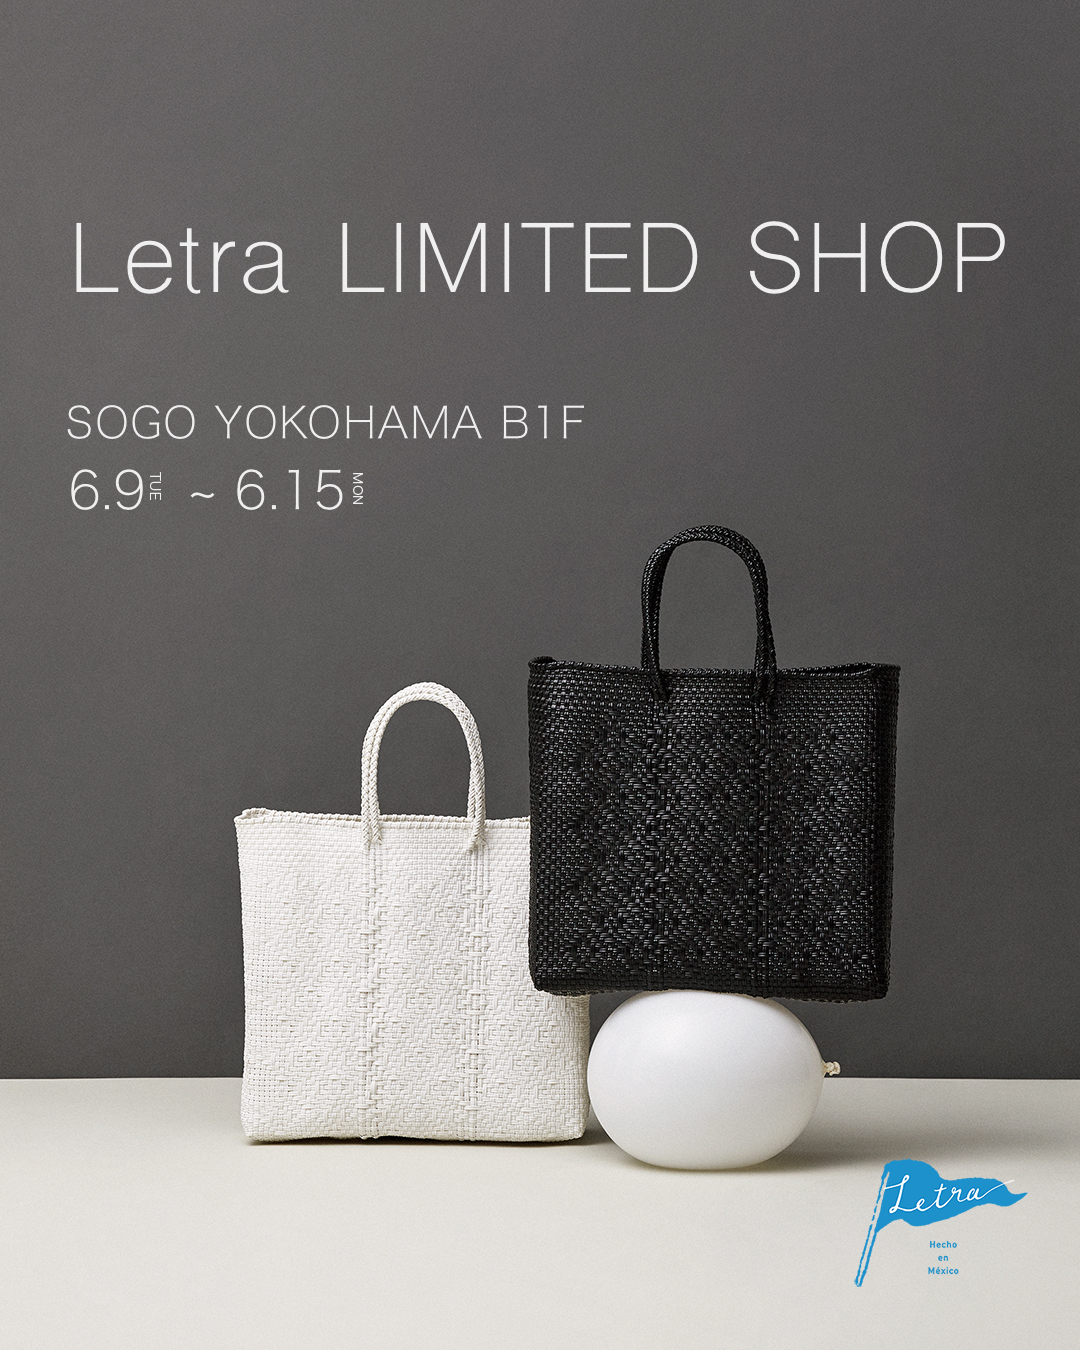 Letra Limited Shop そごう横浜 OPEN！